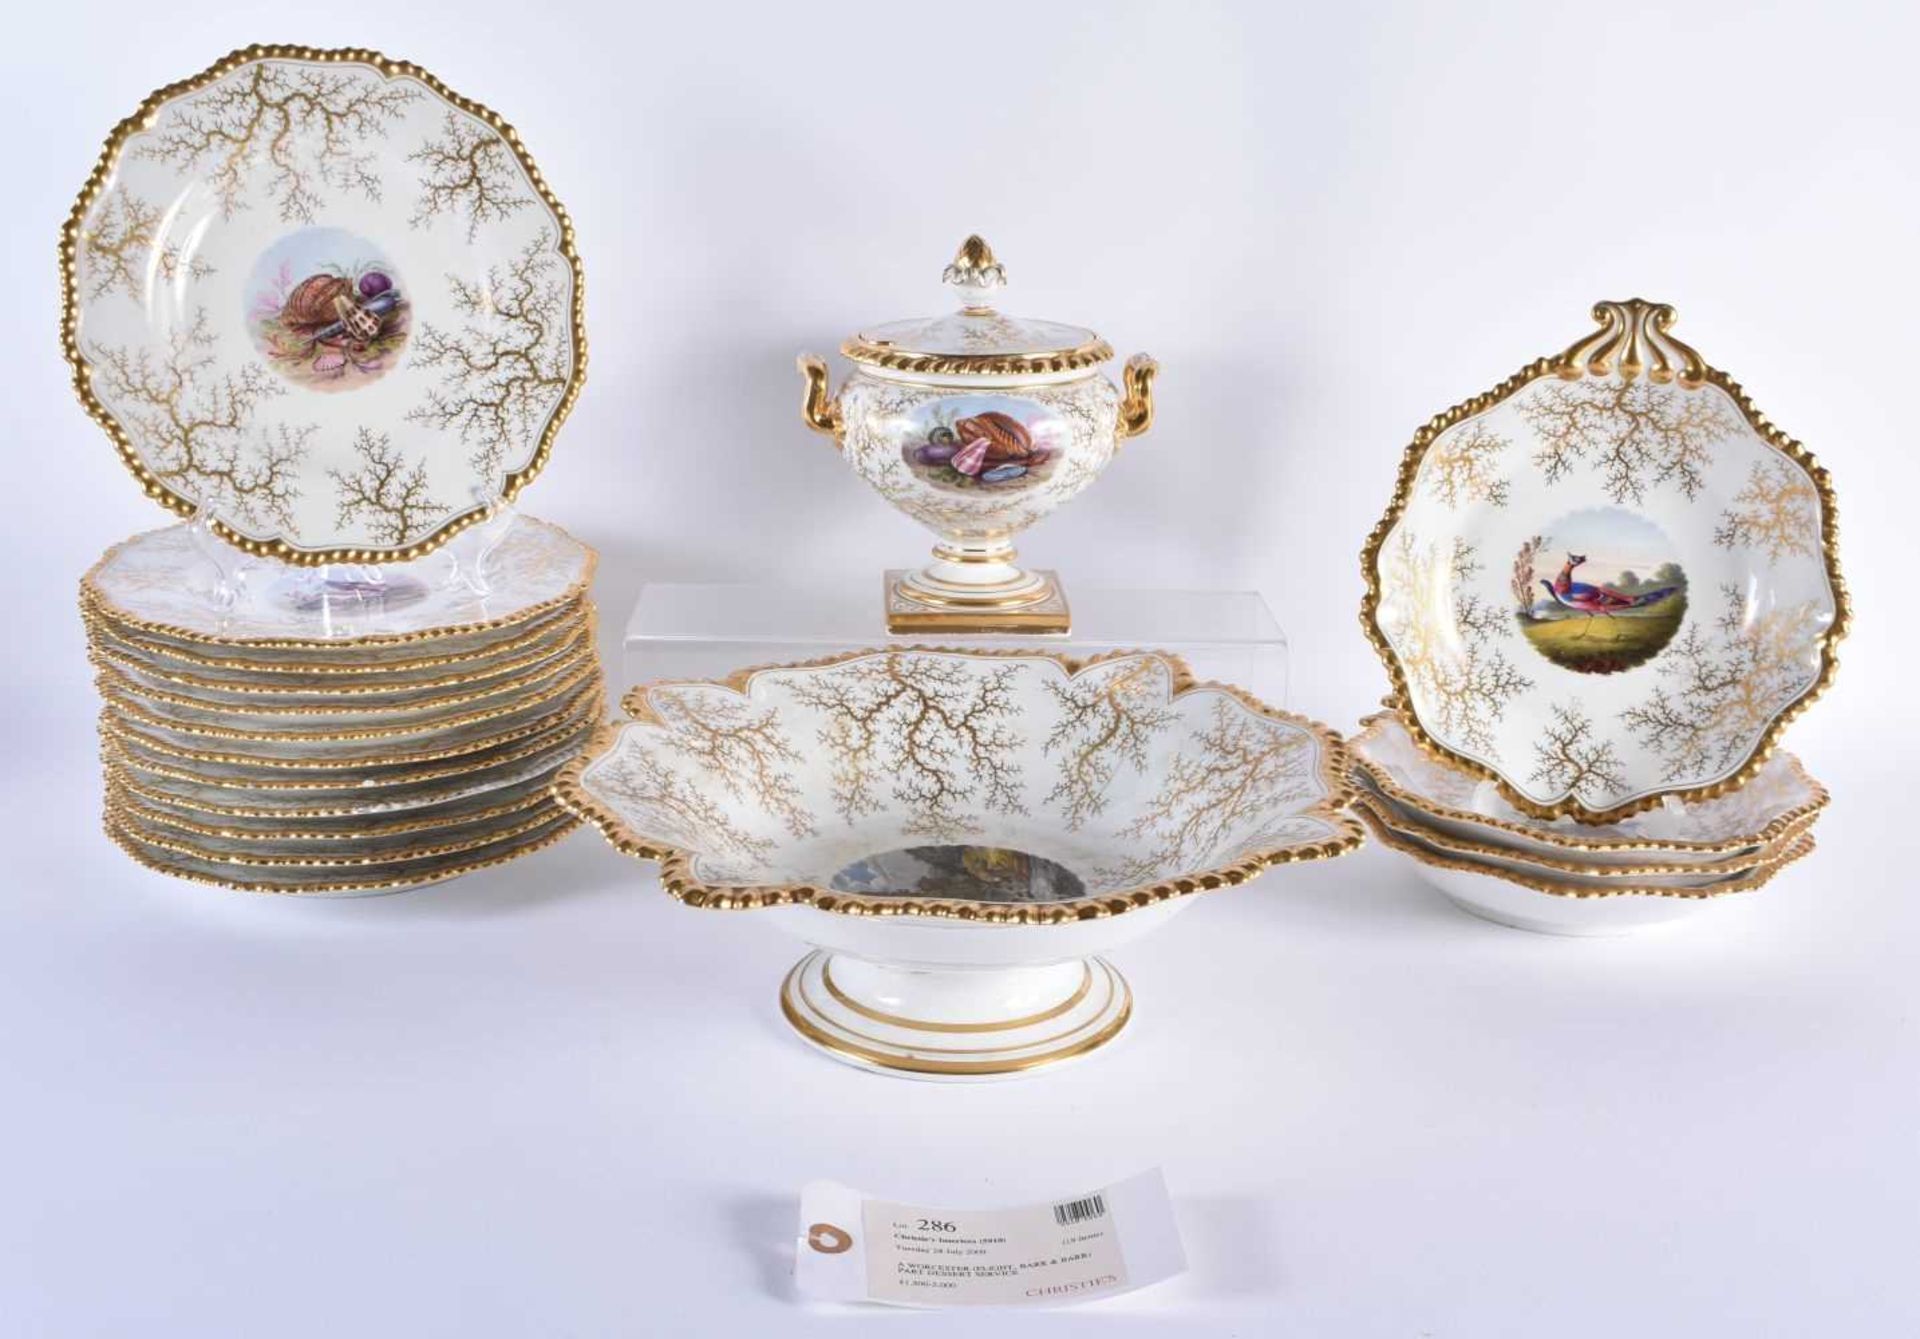 A FINE EARLY 19TH CENTURY FLIGHT BARR AND BARR WORCESTER DESSERT SERVICE painted with landscapes and